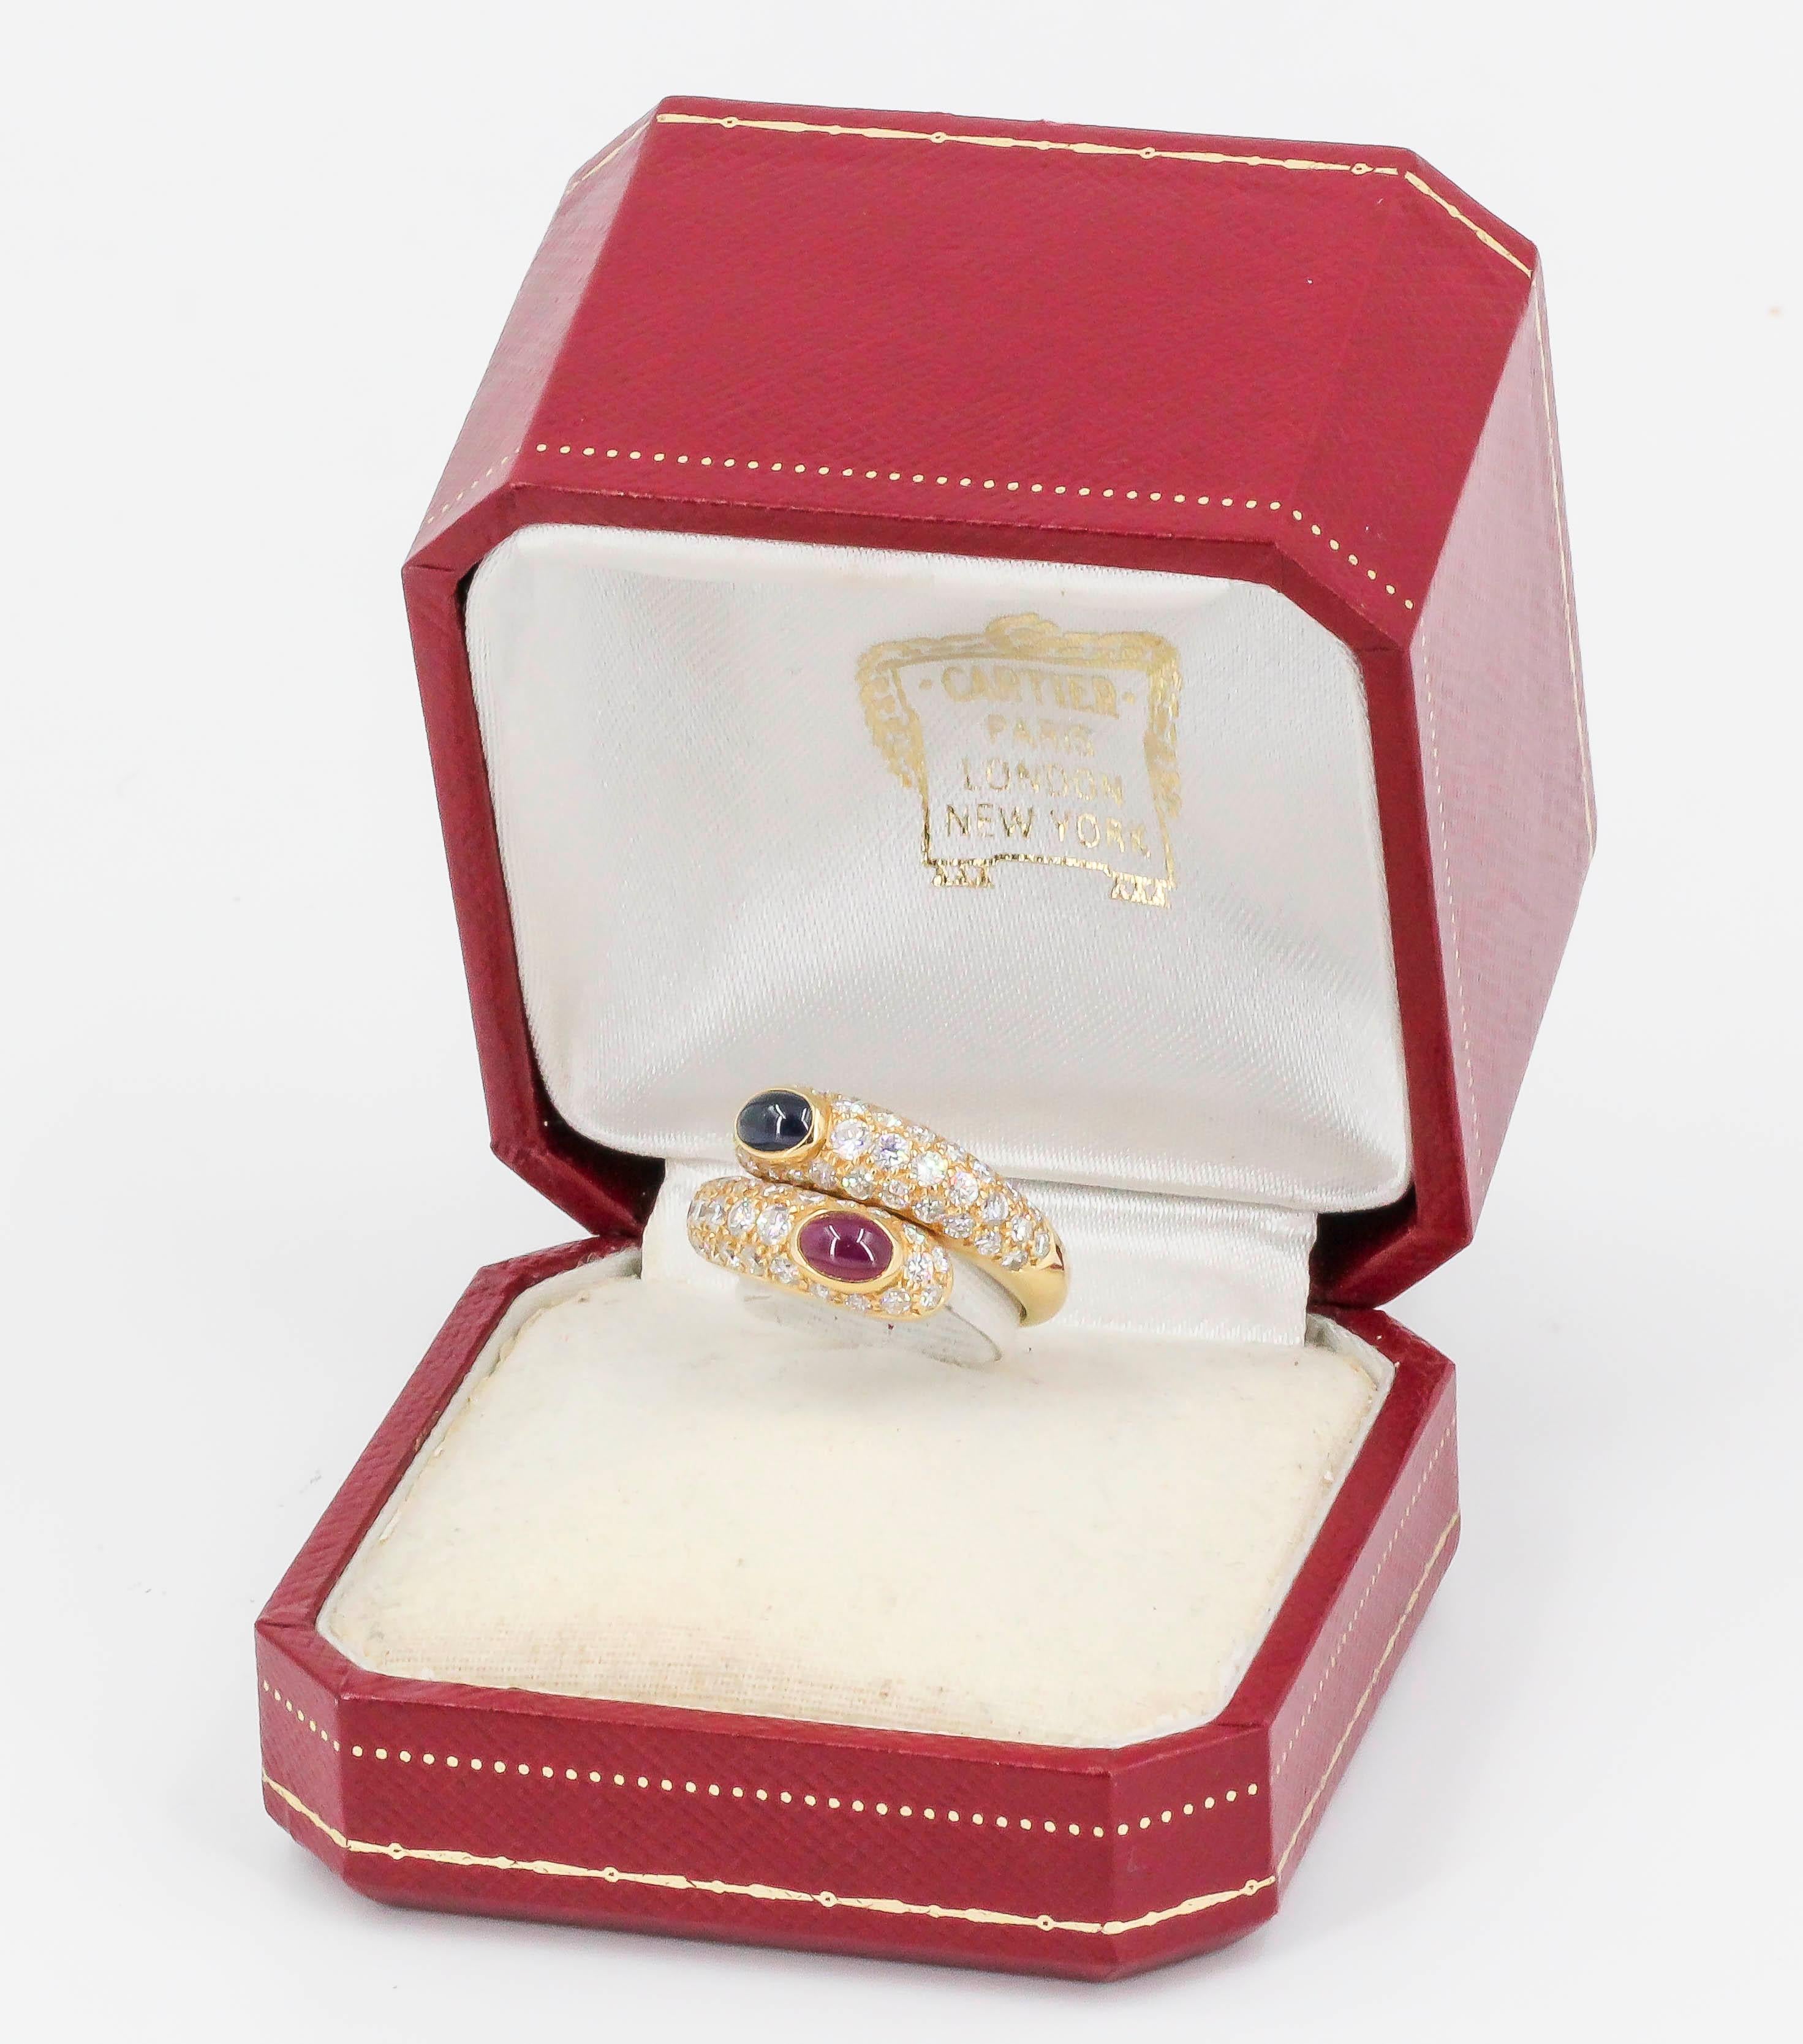 Stylish cabochon sapphire, cabochon ruby, diamond and 18K yellow gold ring by Cartier. It features high grade round brilliant cut diamonds with deep blue cabochon sapphire on one end and rich red cabochon ruby on the other. European size 53, approx.